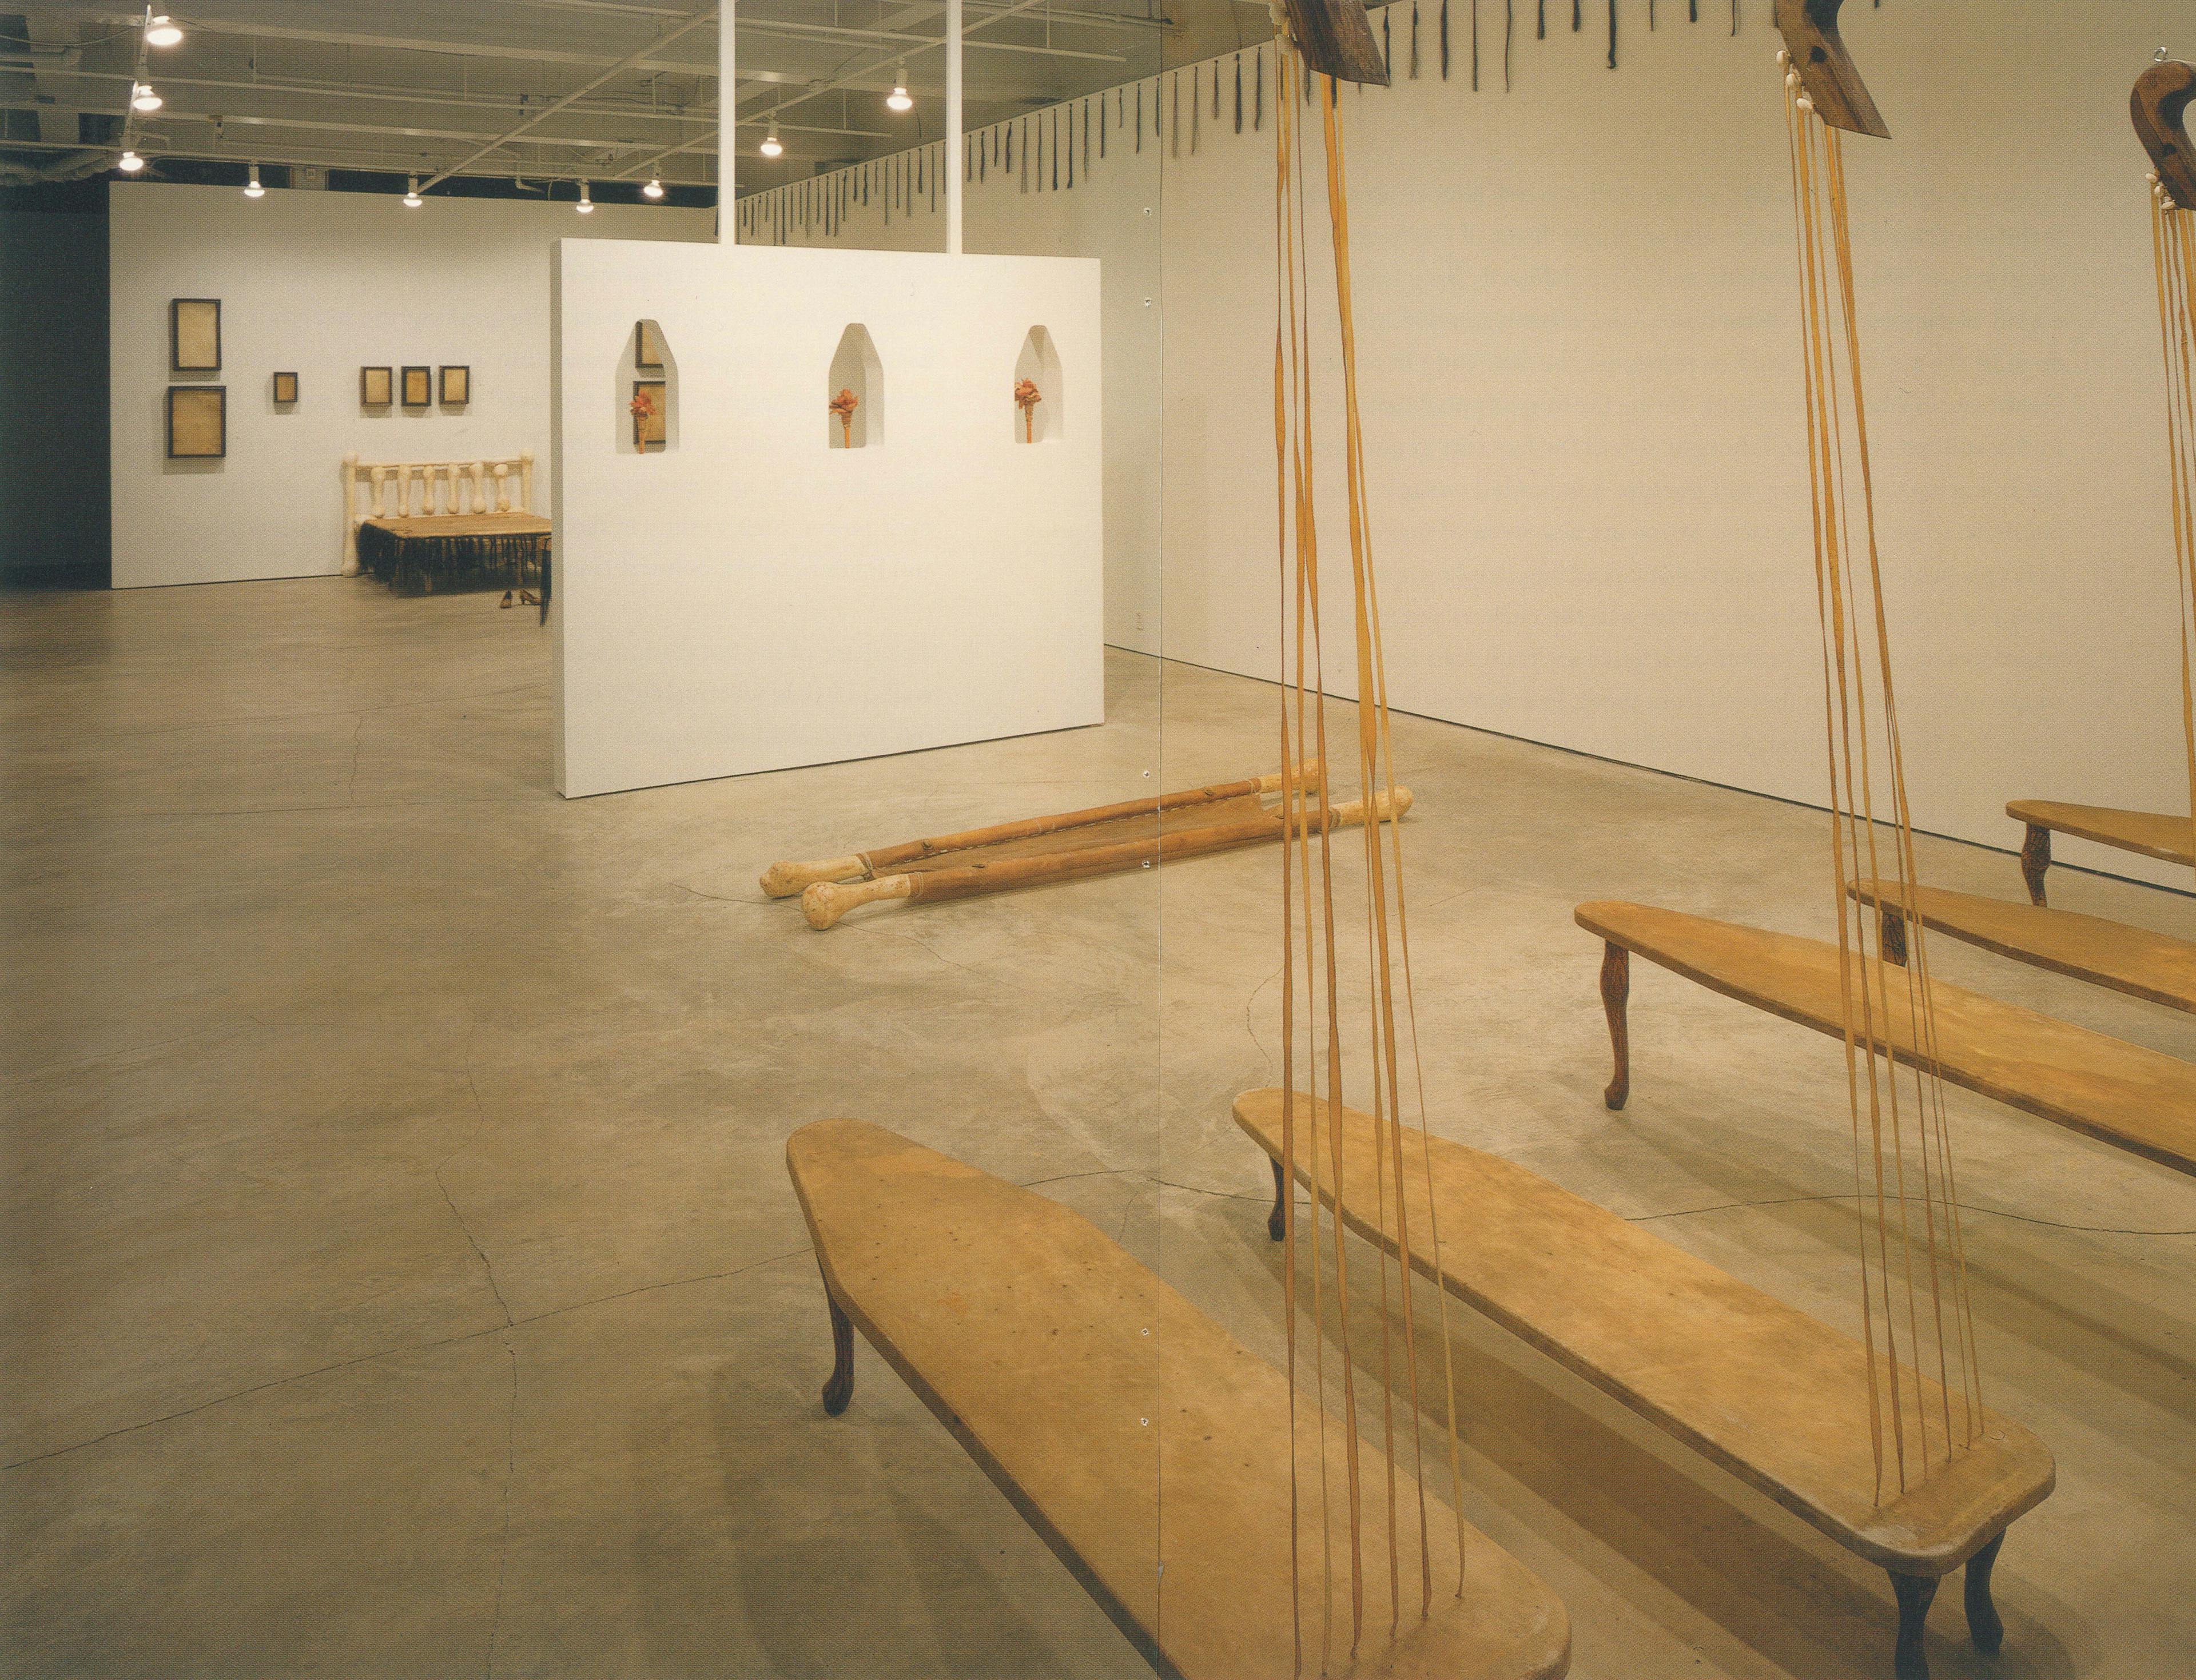 Various artworks are installed in a gallery space. Five low wooden benches, or ironing boards, are placed in a row. A pair of long wooden poles are laid on the floor some feet away from the benches. 